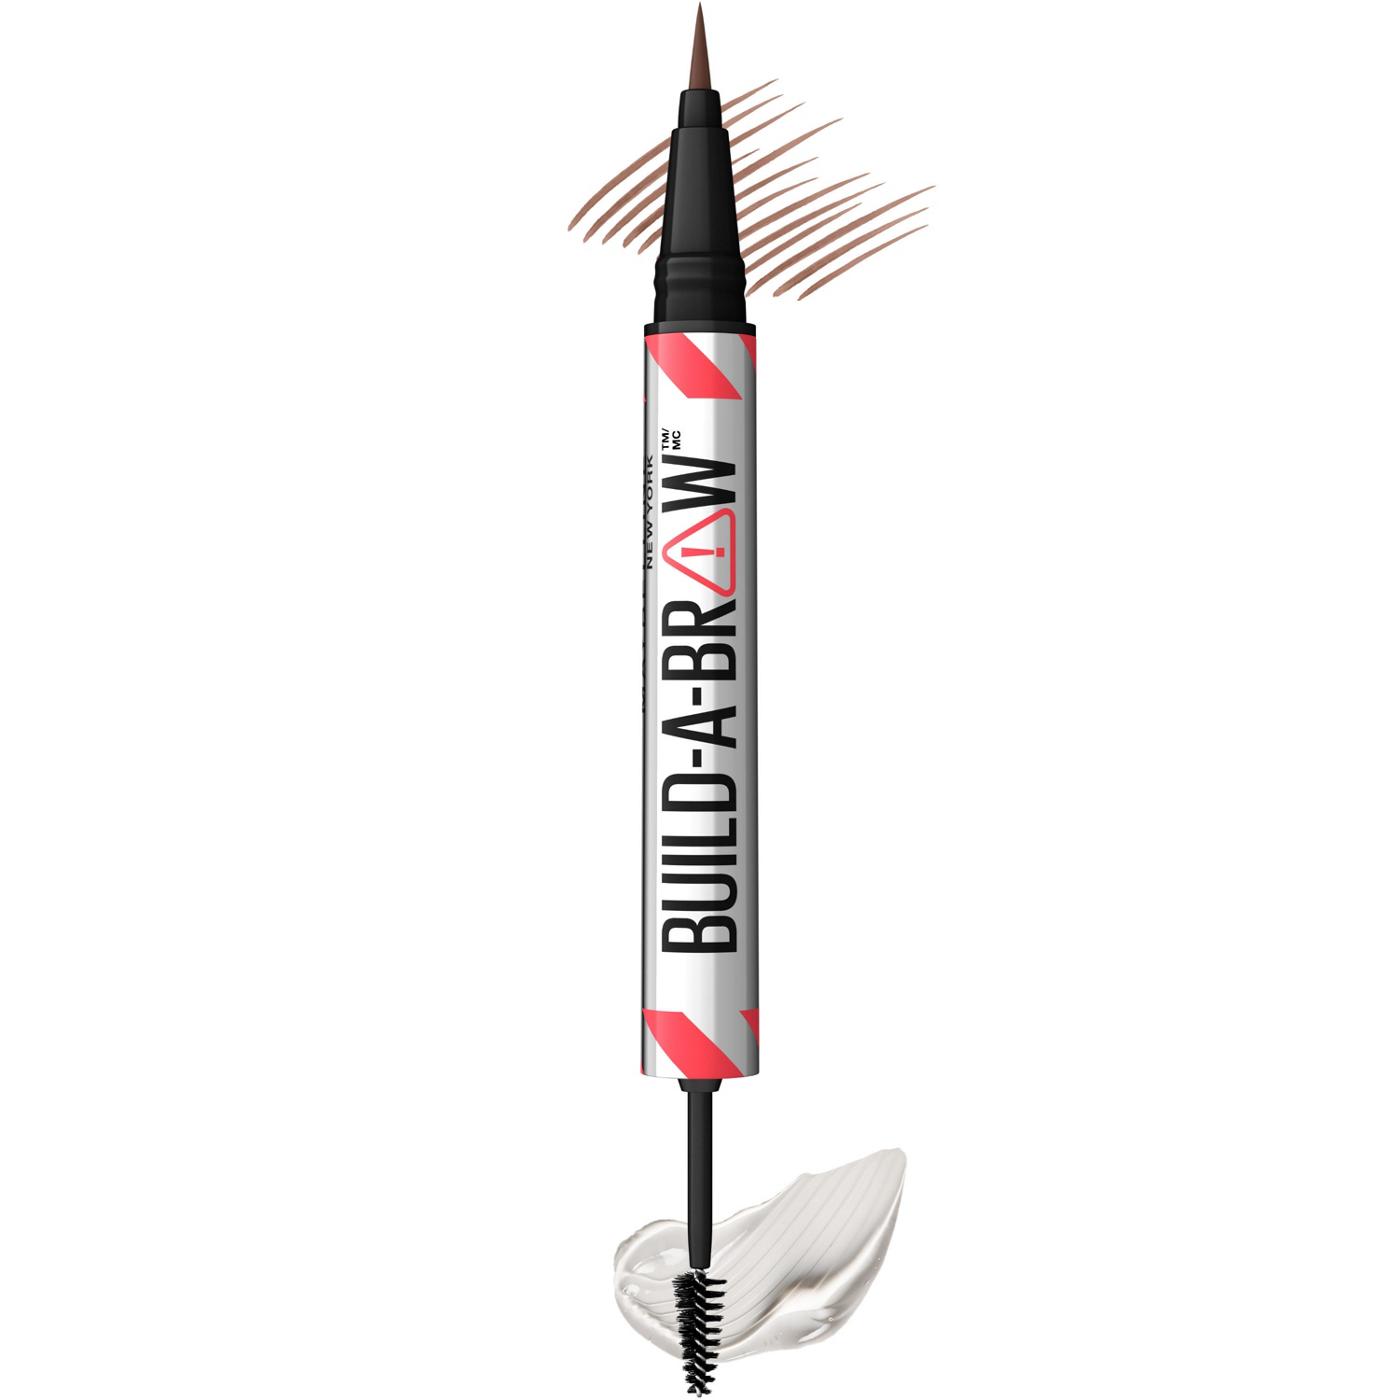 Maybelline Build A Brow 2 In 1 Brow Pen - Medium Brown; image 12 of 16